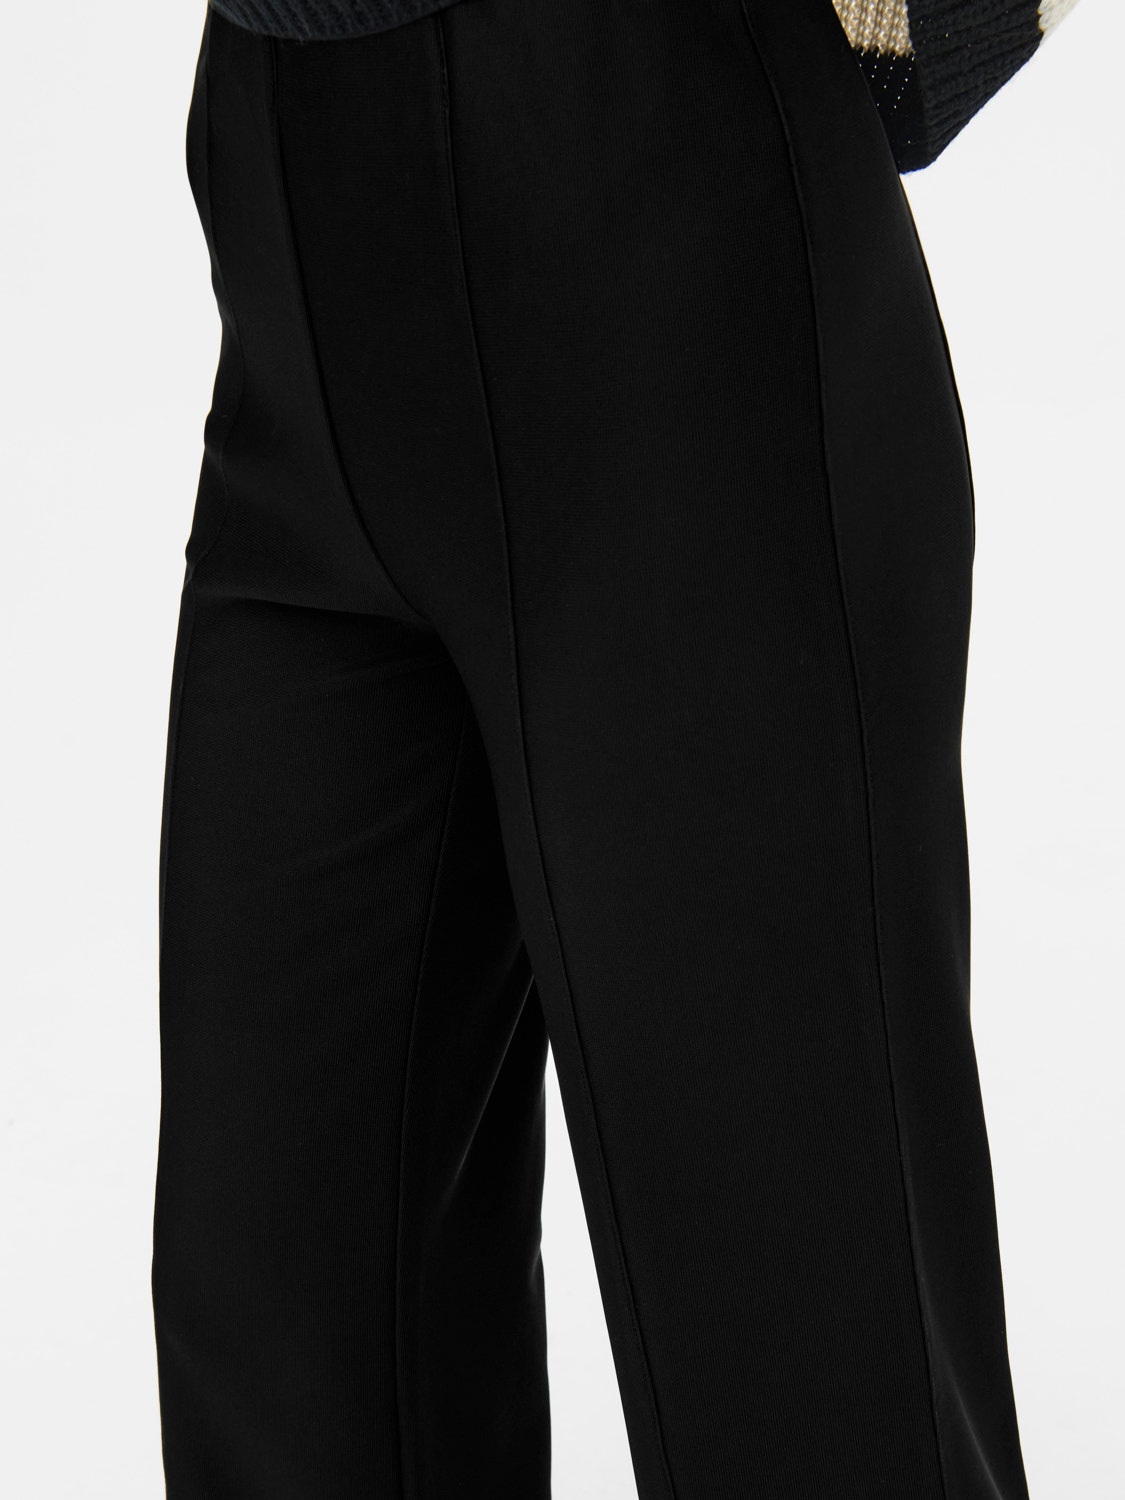 ONLY Wide leg Trousers -Black - 15264684